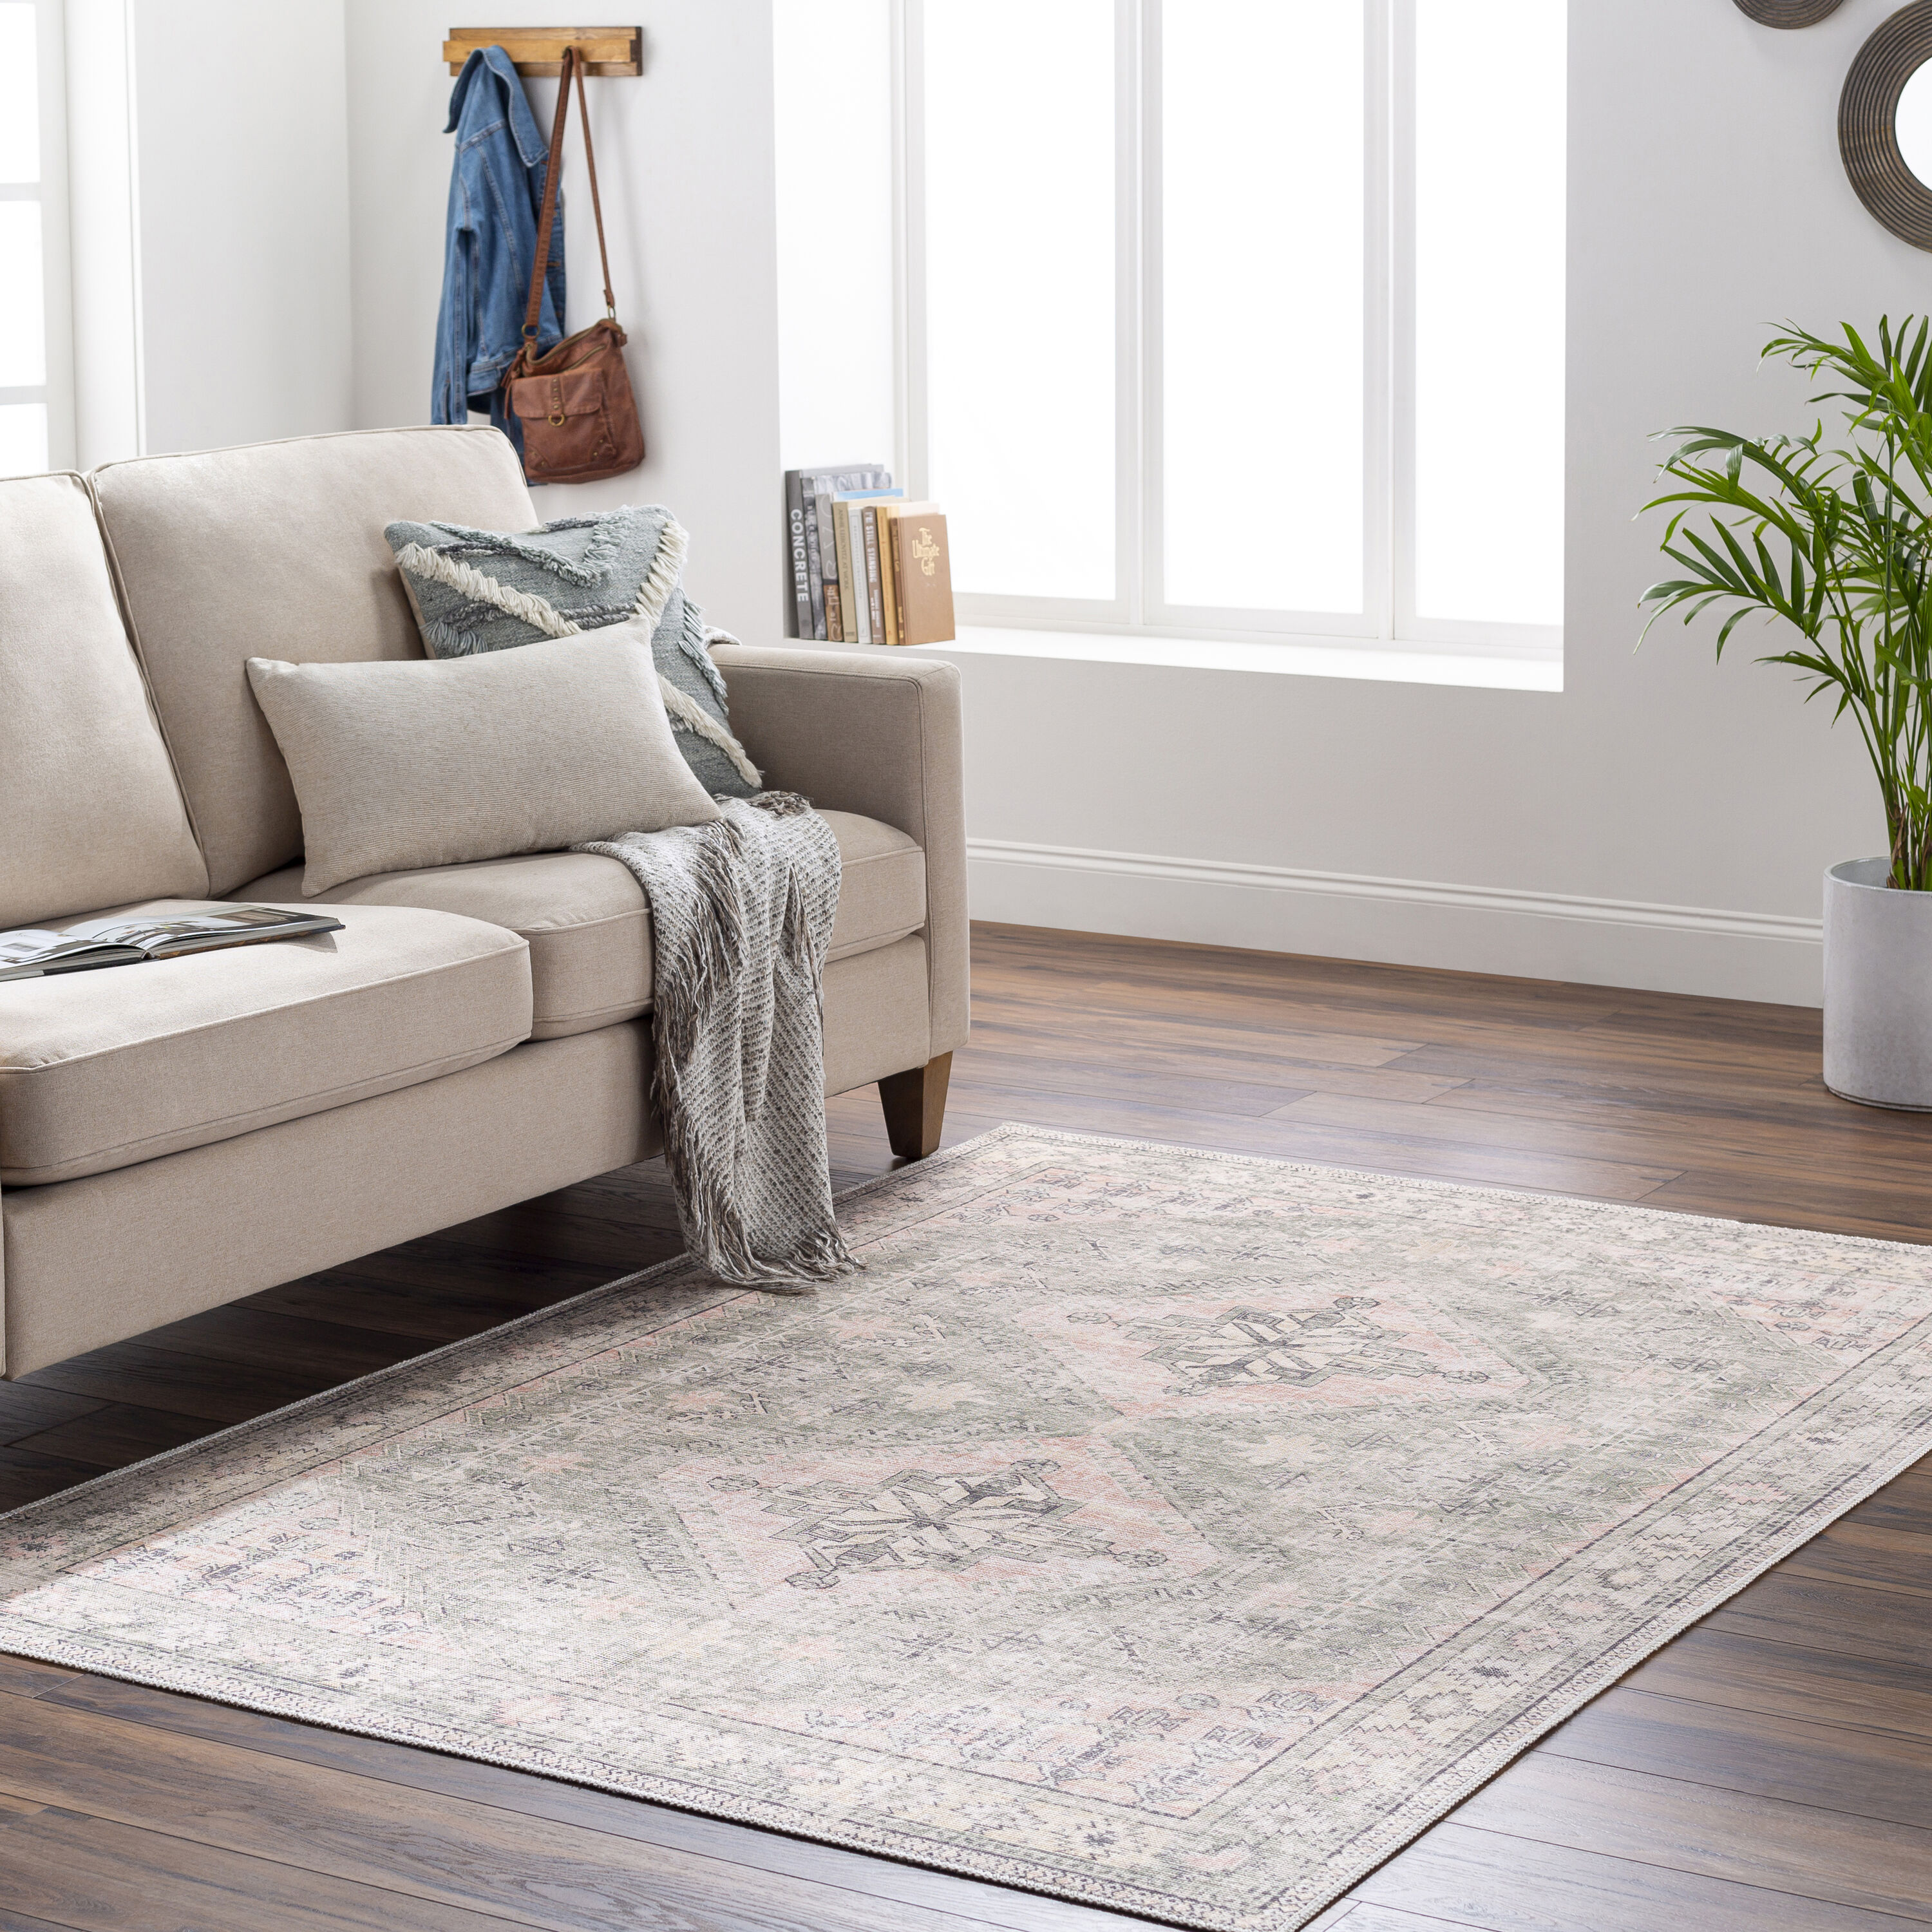 4' x 6' Grey Charcoal Gold Brown Ivory Pale Sage and Light Blue Oriental Printed Stain Resistant Non Skid Area Rug